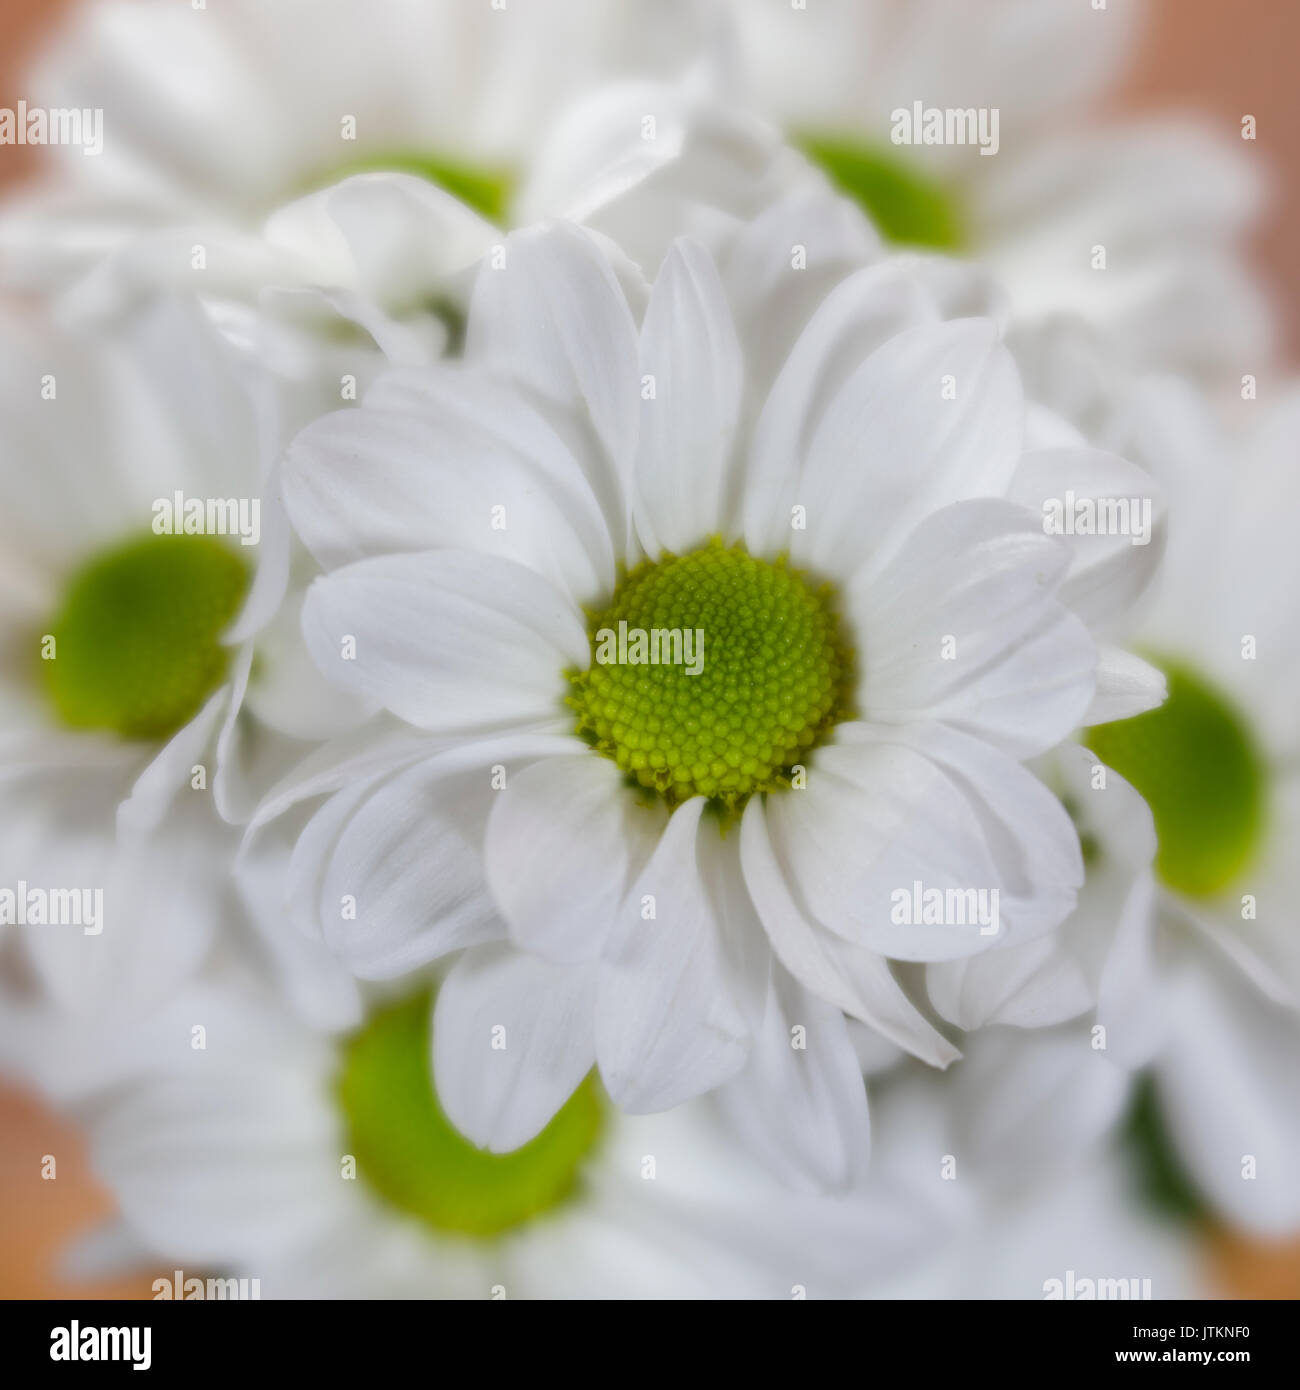 Soft focus white and green daisis Stock Photo